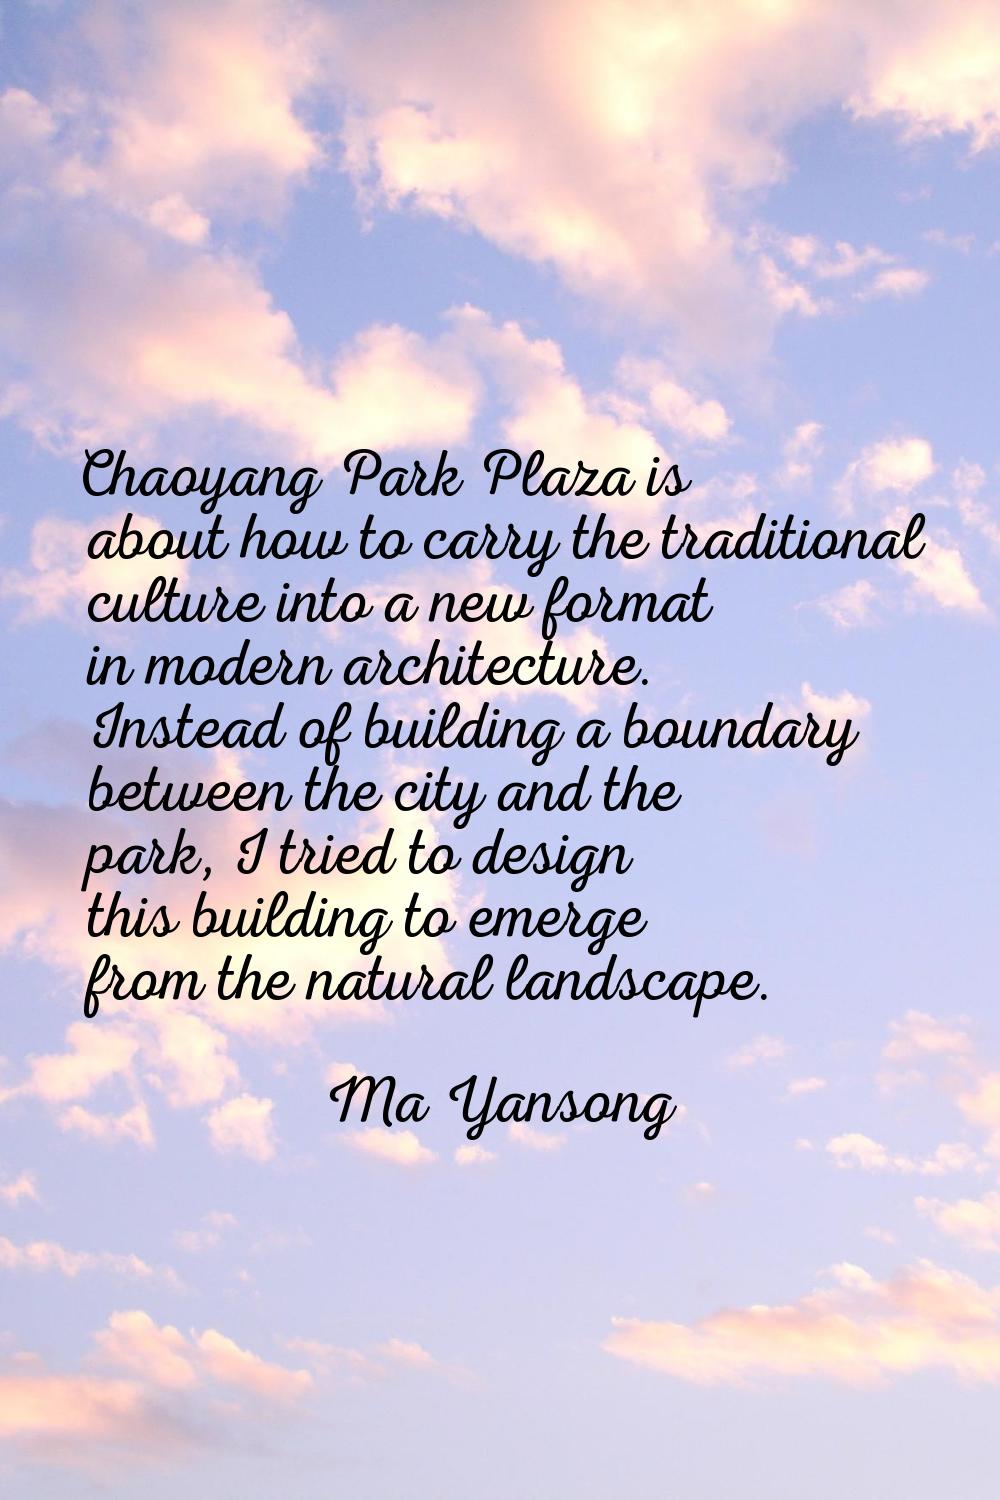 Chaoyang Park Plaza is about how to carry the traditional culture into a new format in modern archi